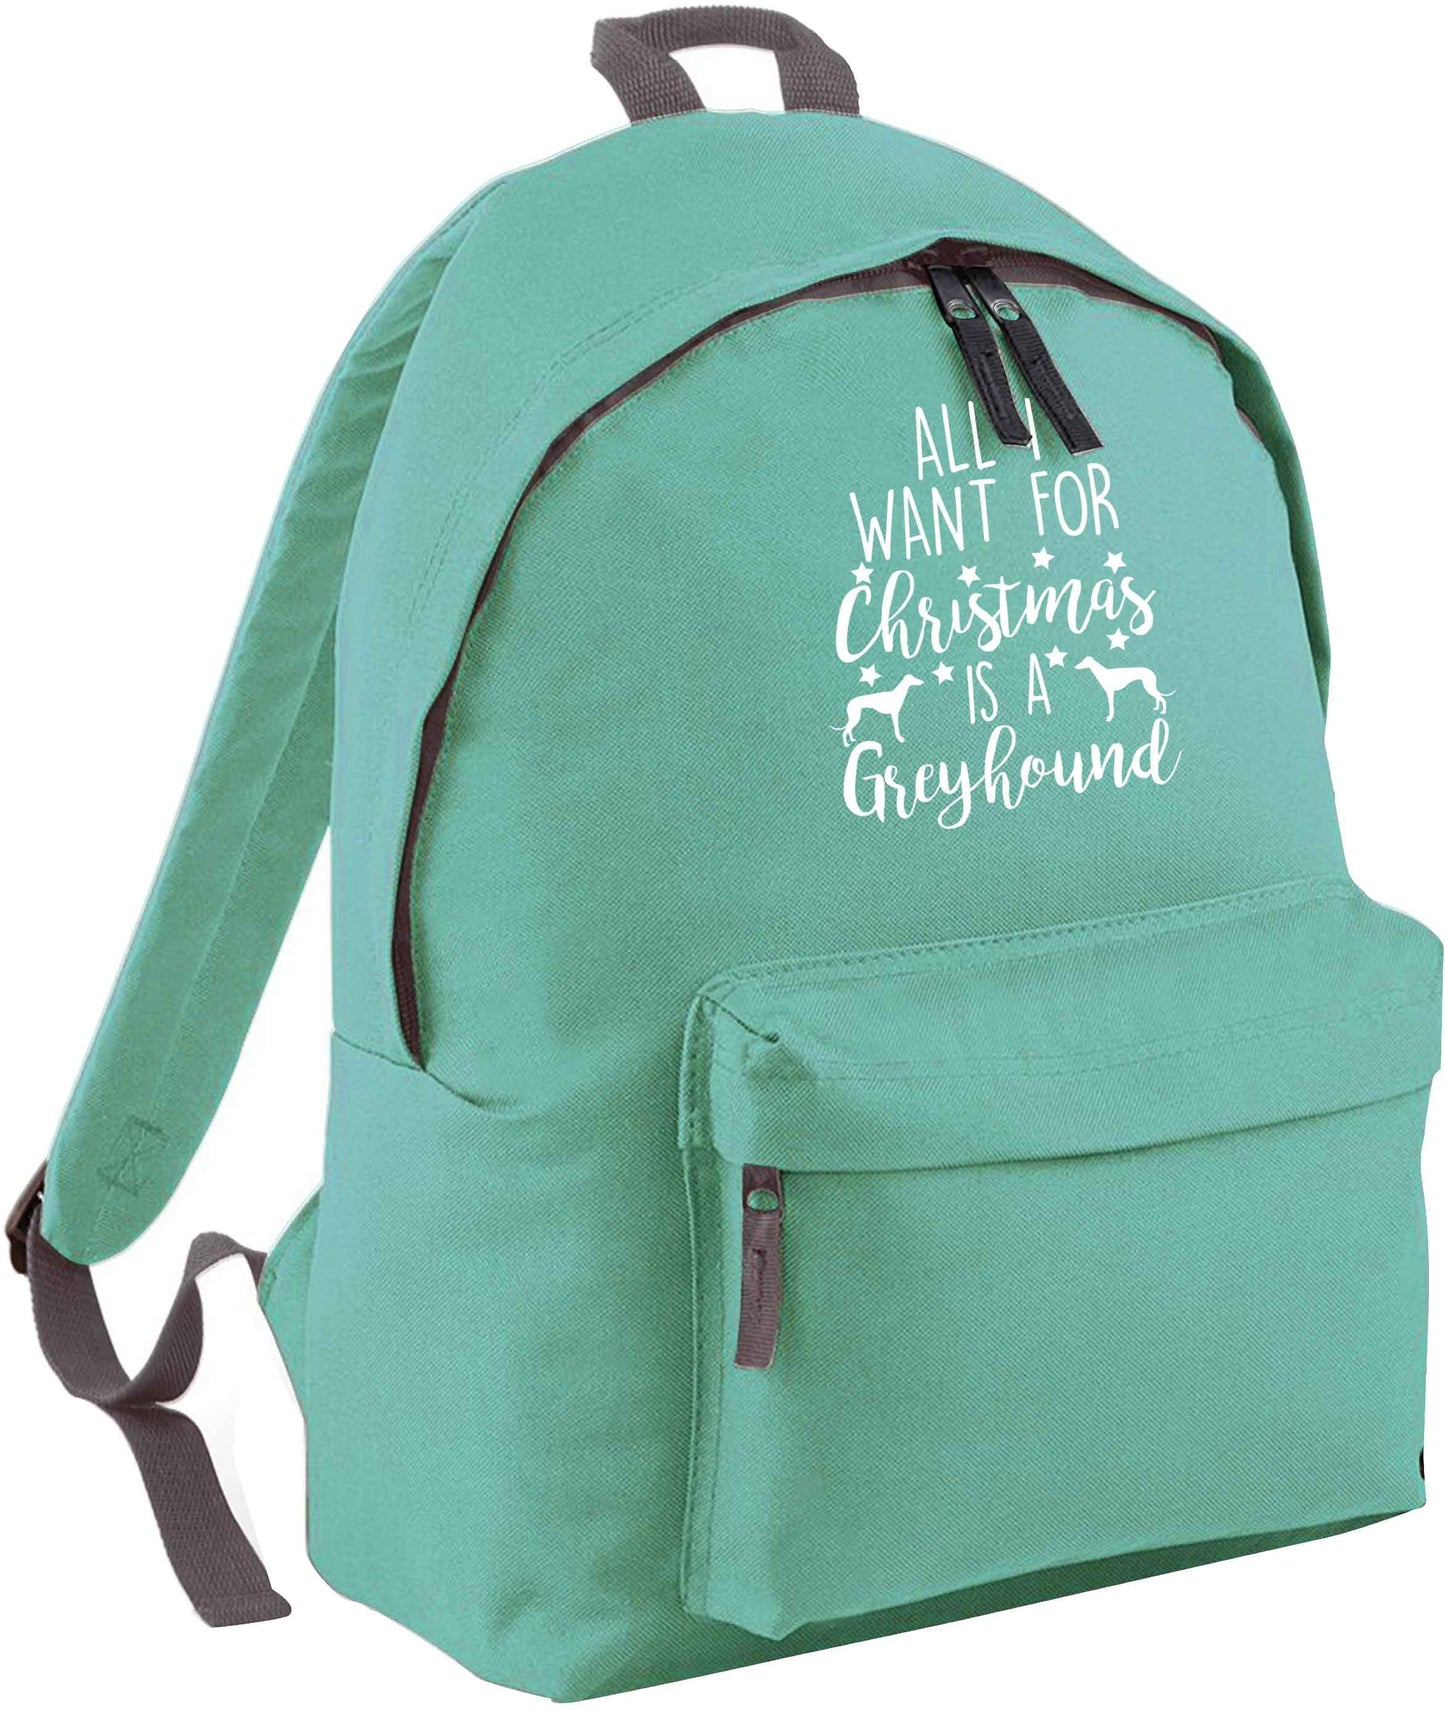 All I want for Christmas is a greyhound mint adults backpack